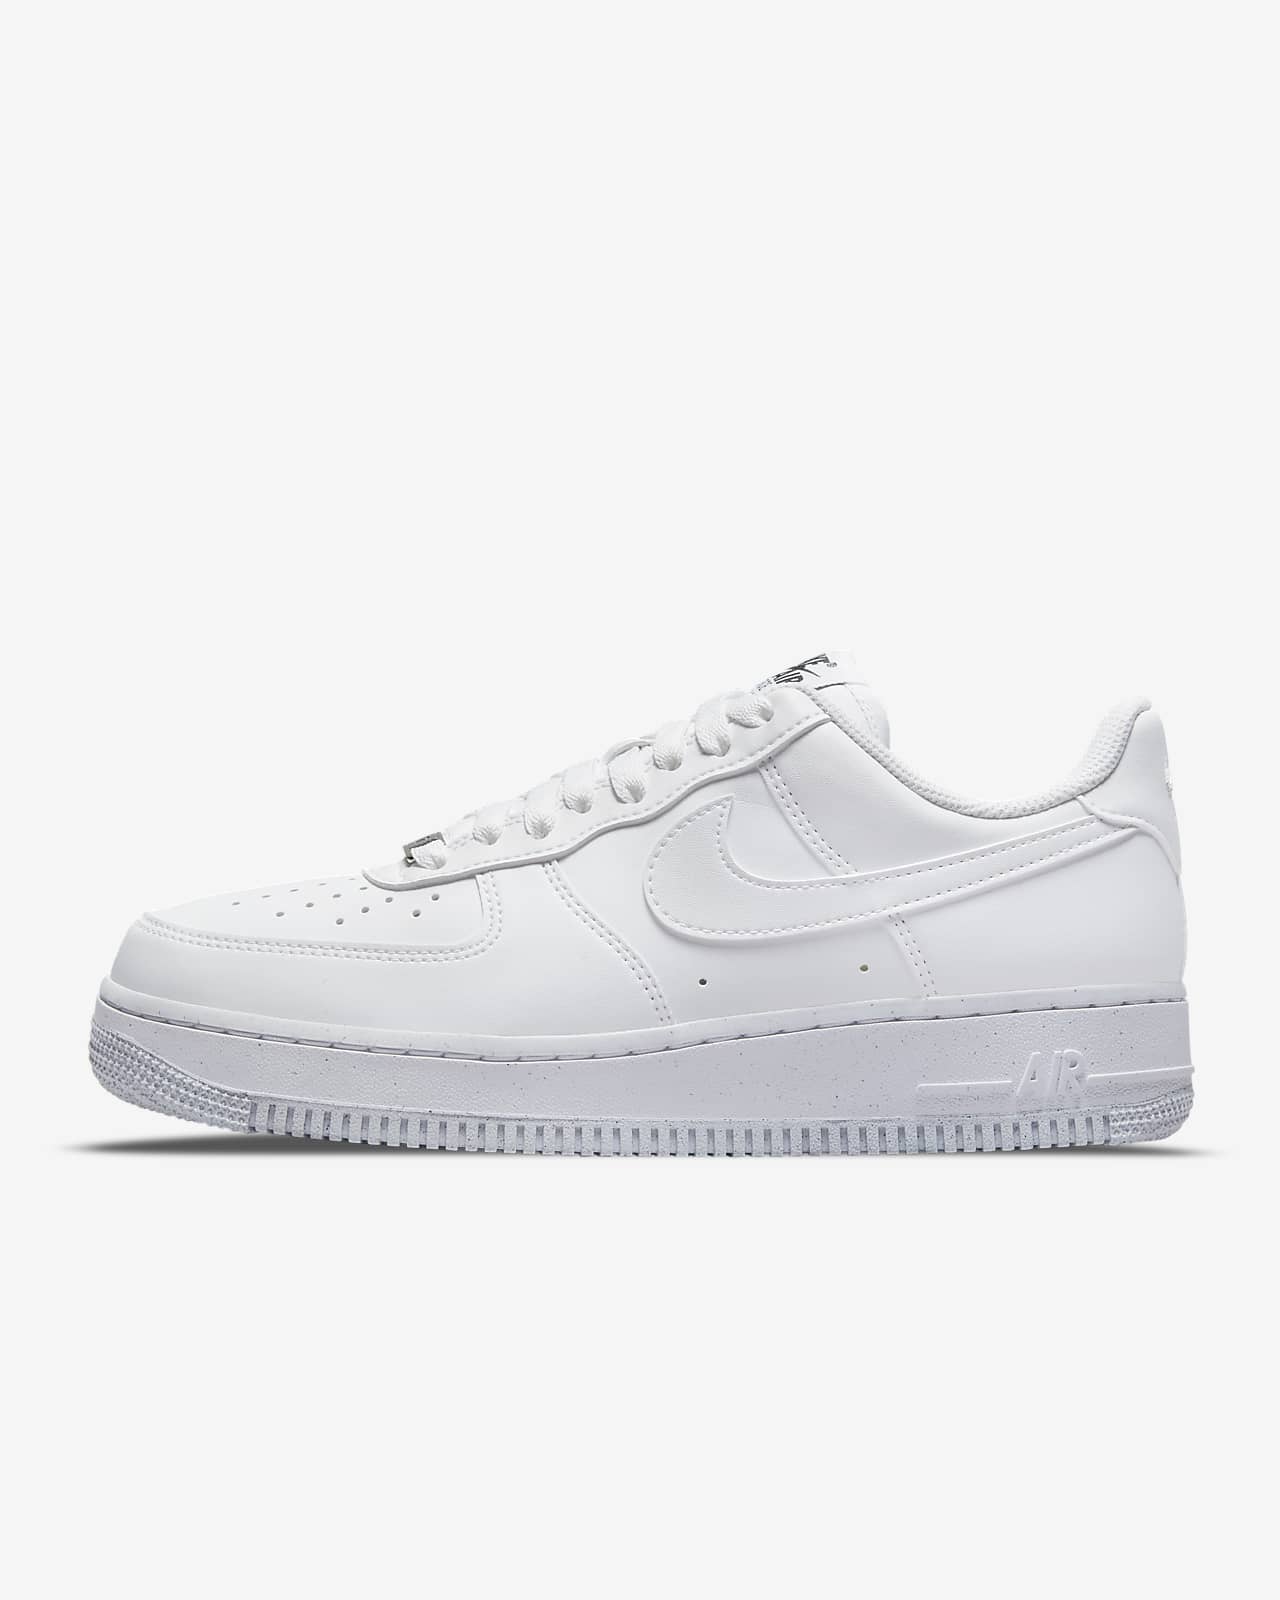 latch cafeteria battery Nike Air Force 1 '07 Next Nature Women's Shoes. Nike.com